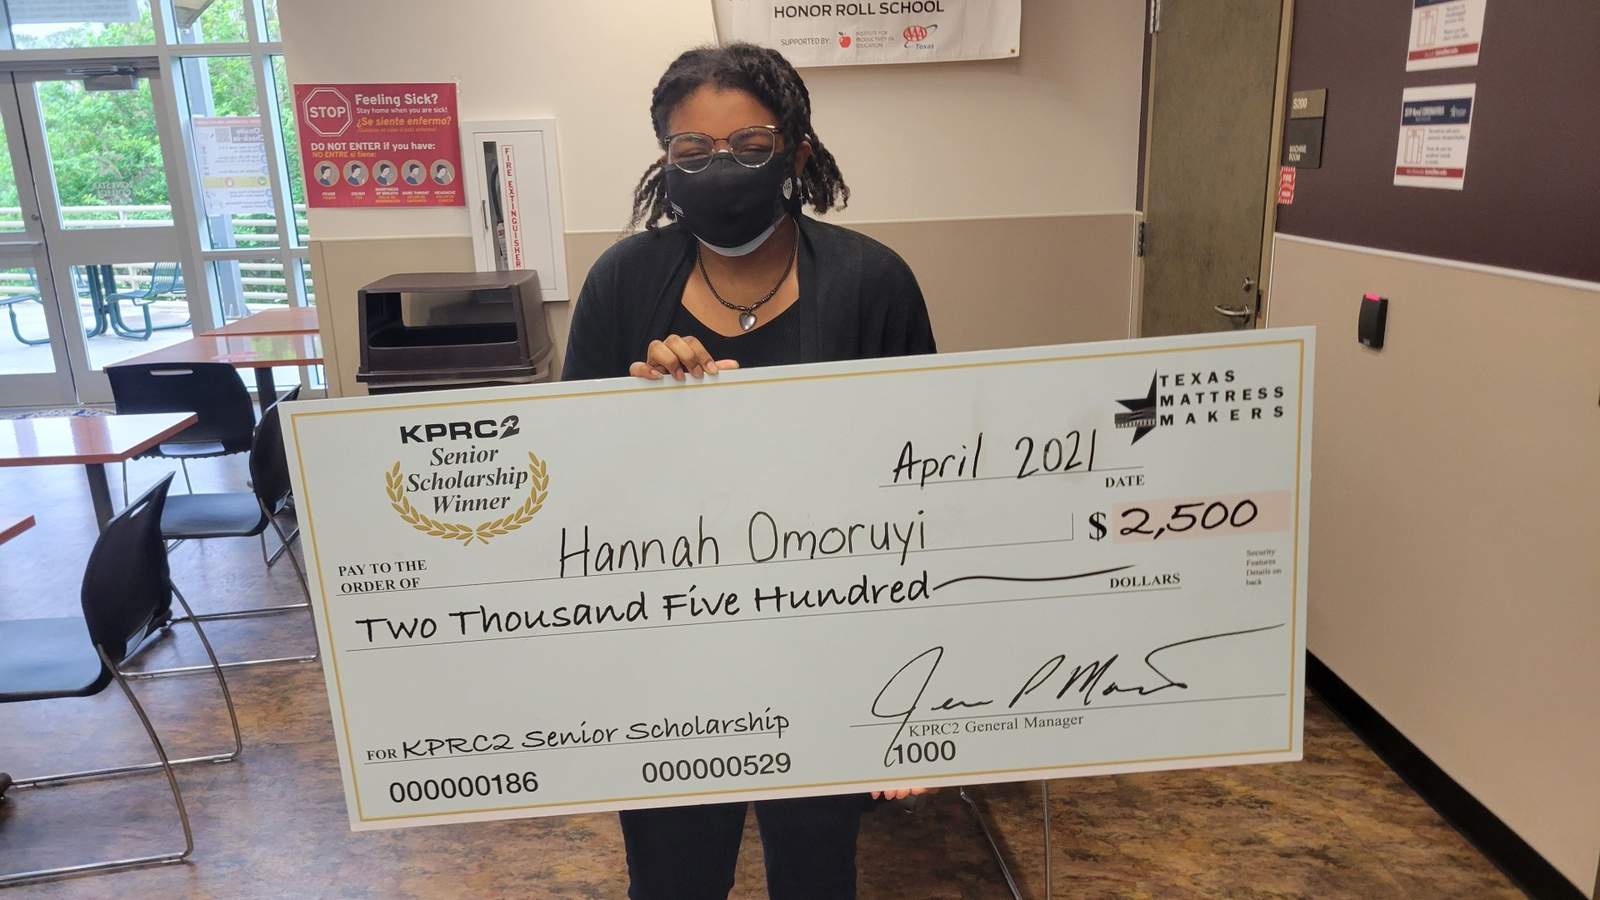 KPRC 2 Senior Scholarship: Meet Hannah Omoruyi, the senior who wants to one day help develop medications for different mental illnesses